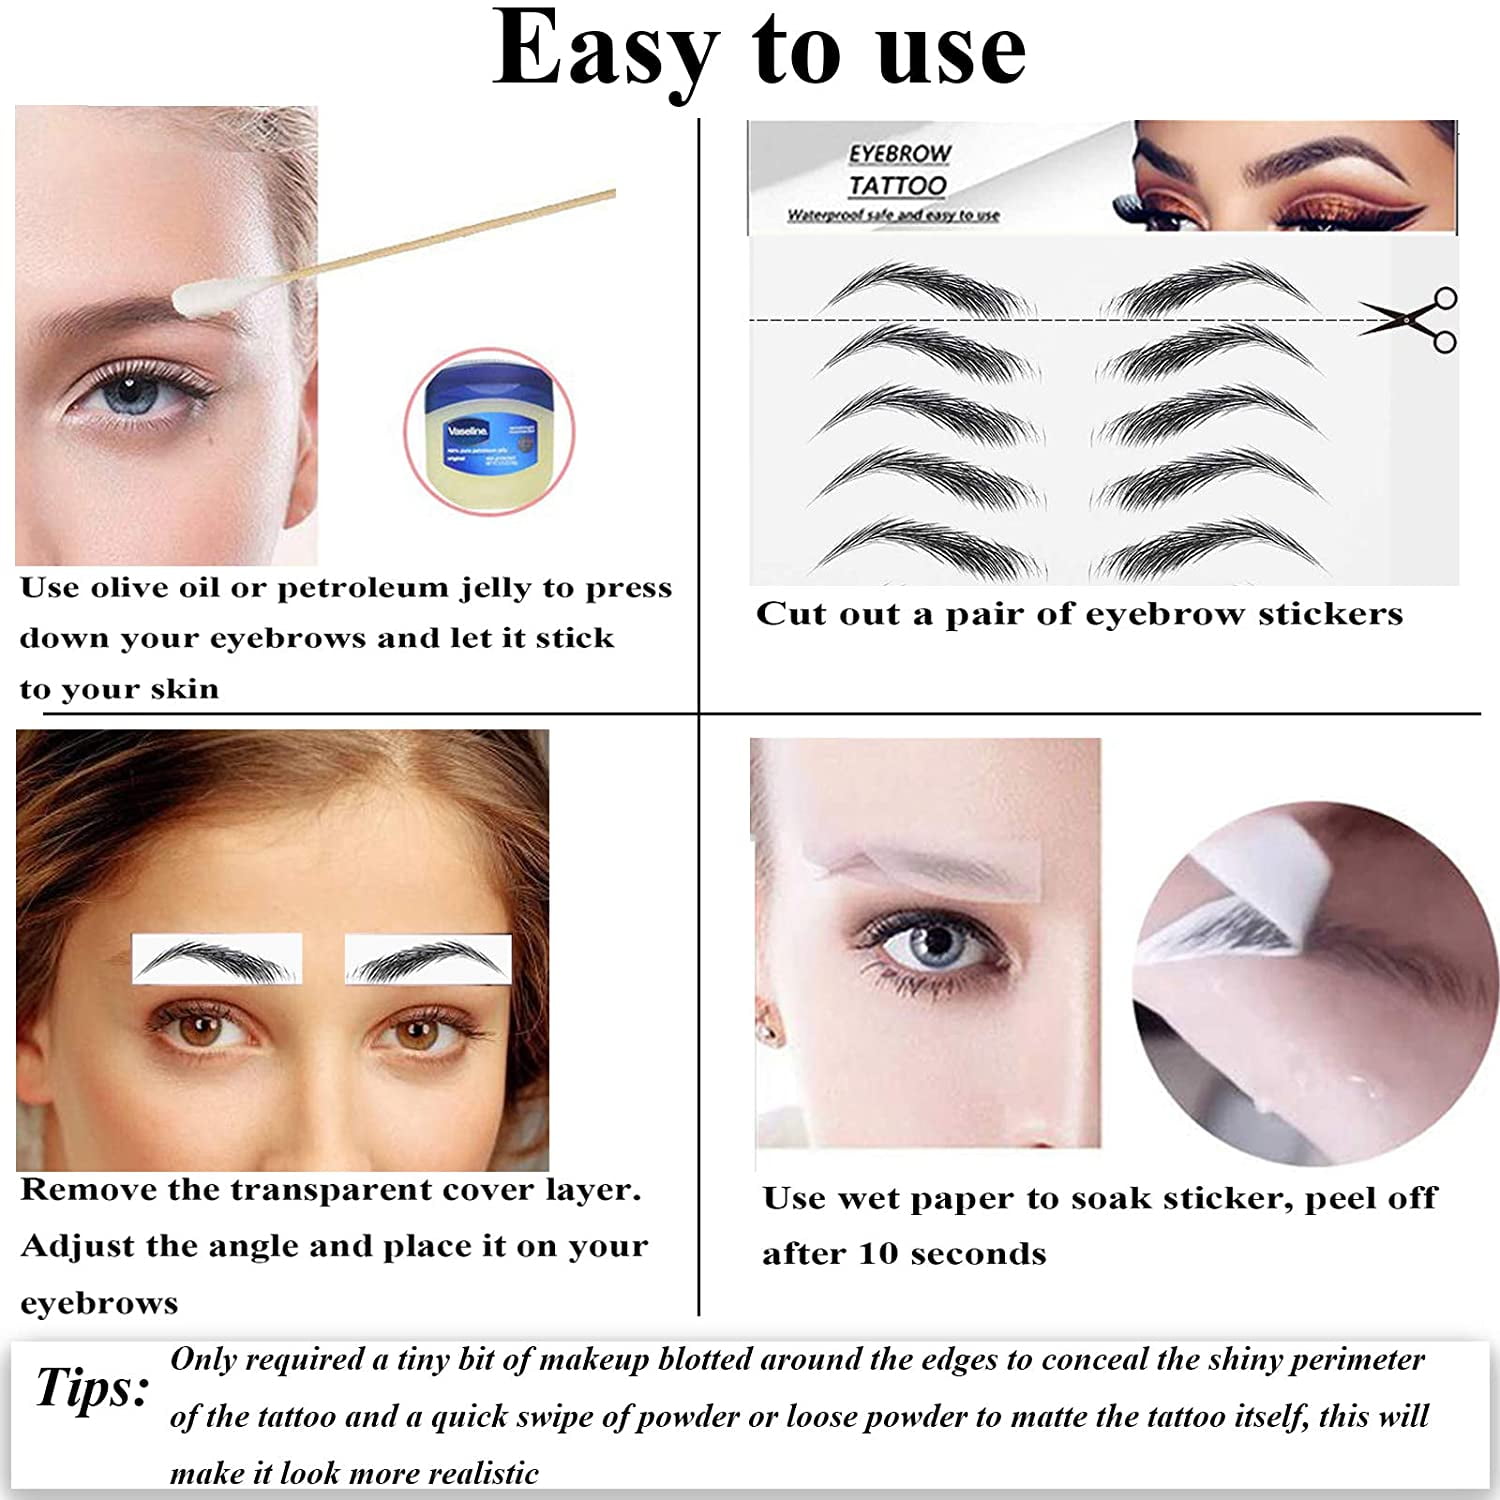 4D Hair-like Authentic Eyebrows,Brown Imitation Tattoo Eyebrow Stickers Ecological Lazy Natural Brow Waterproof Makeup Tool 20 Pairs - Walmart.com